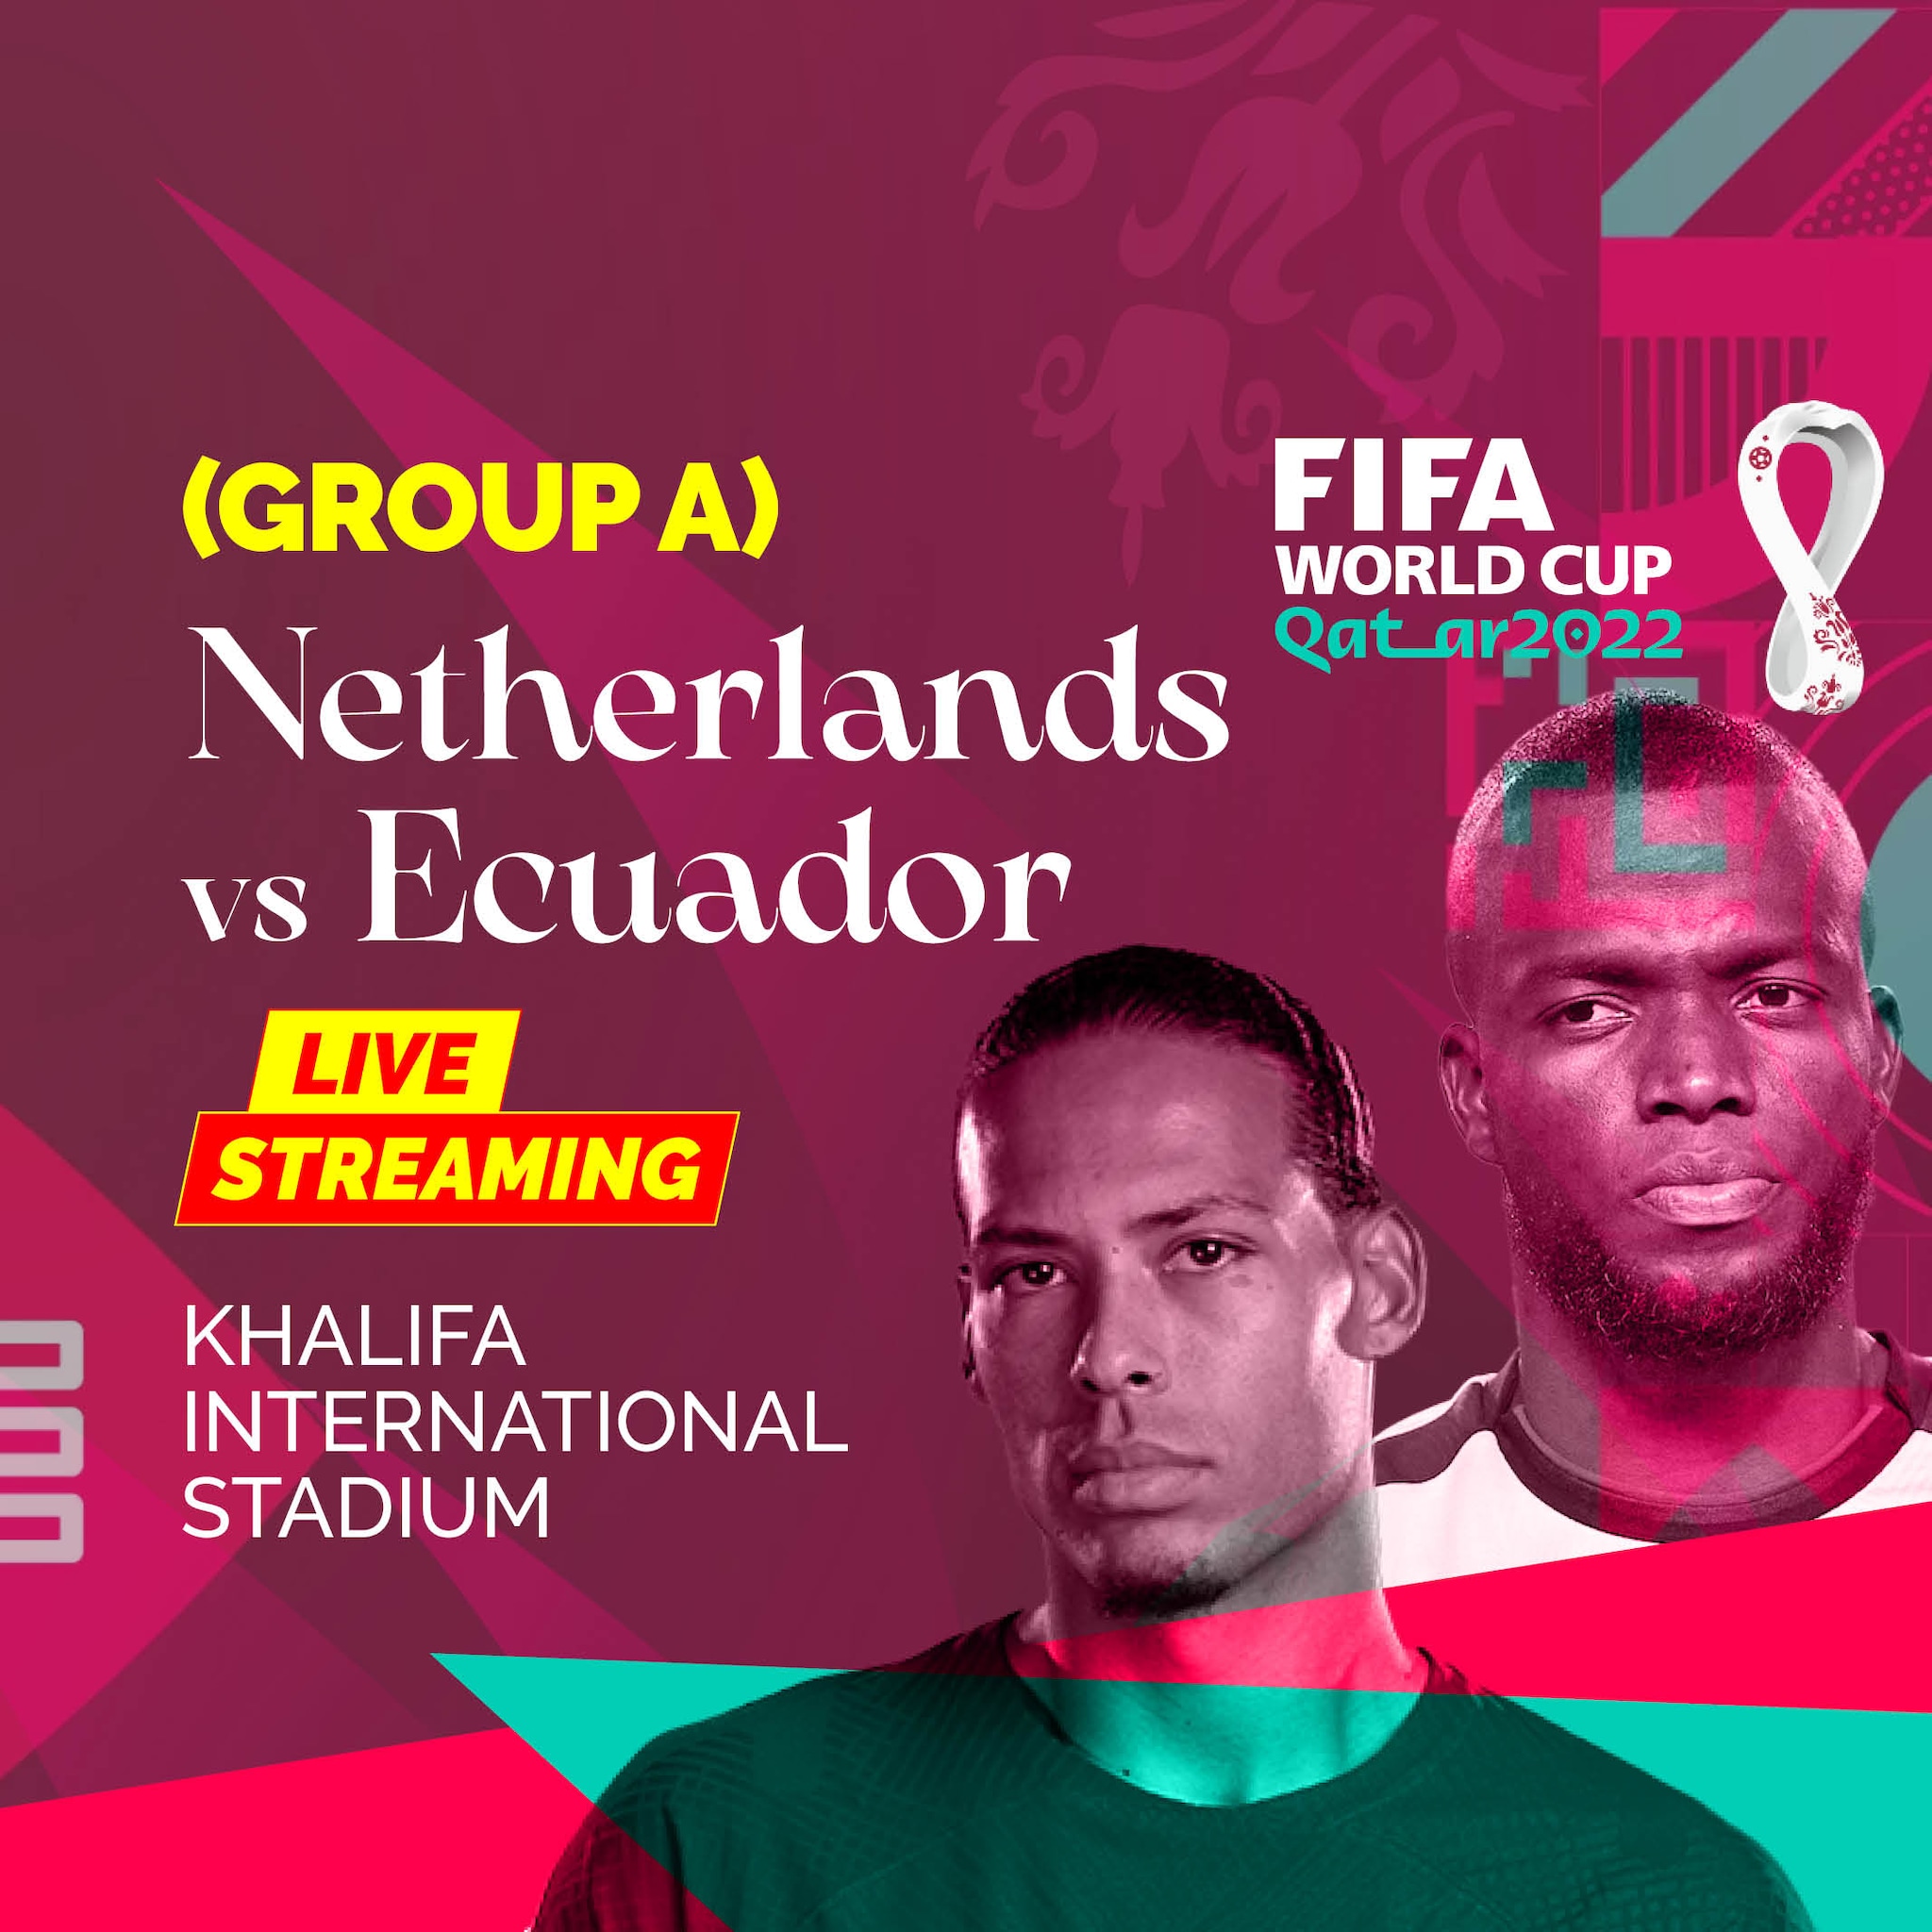 Netherlands vs Ecuador Live Streaming How to watch FIFA World Cup 2022 Matches in India?